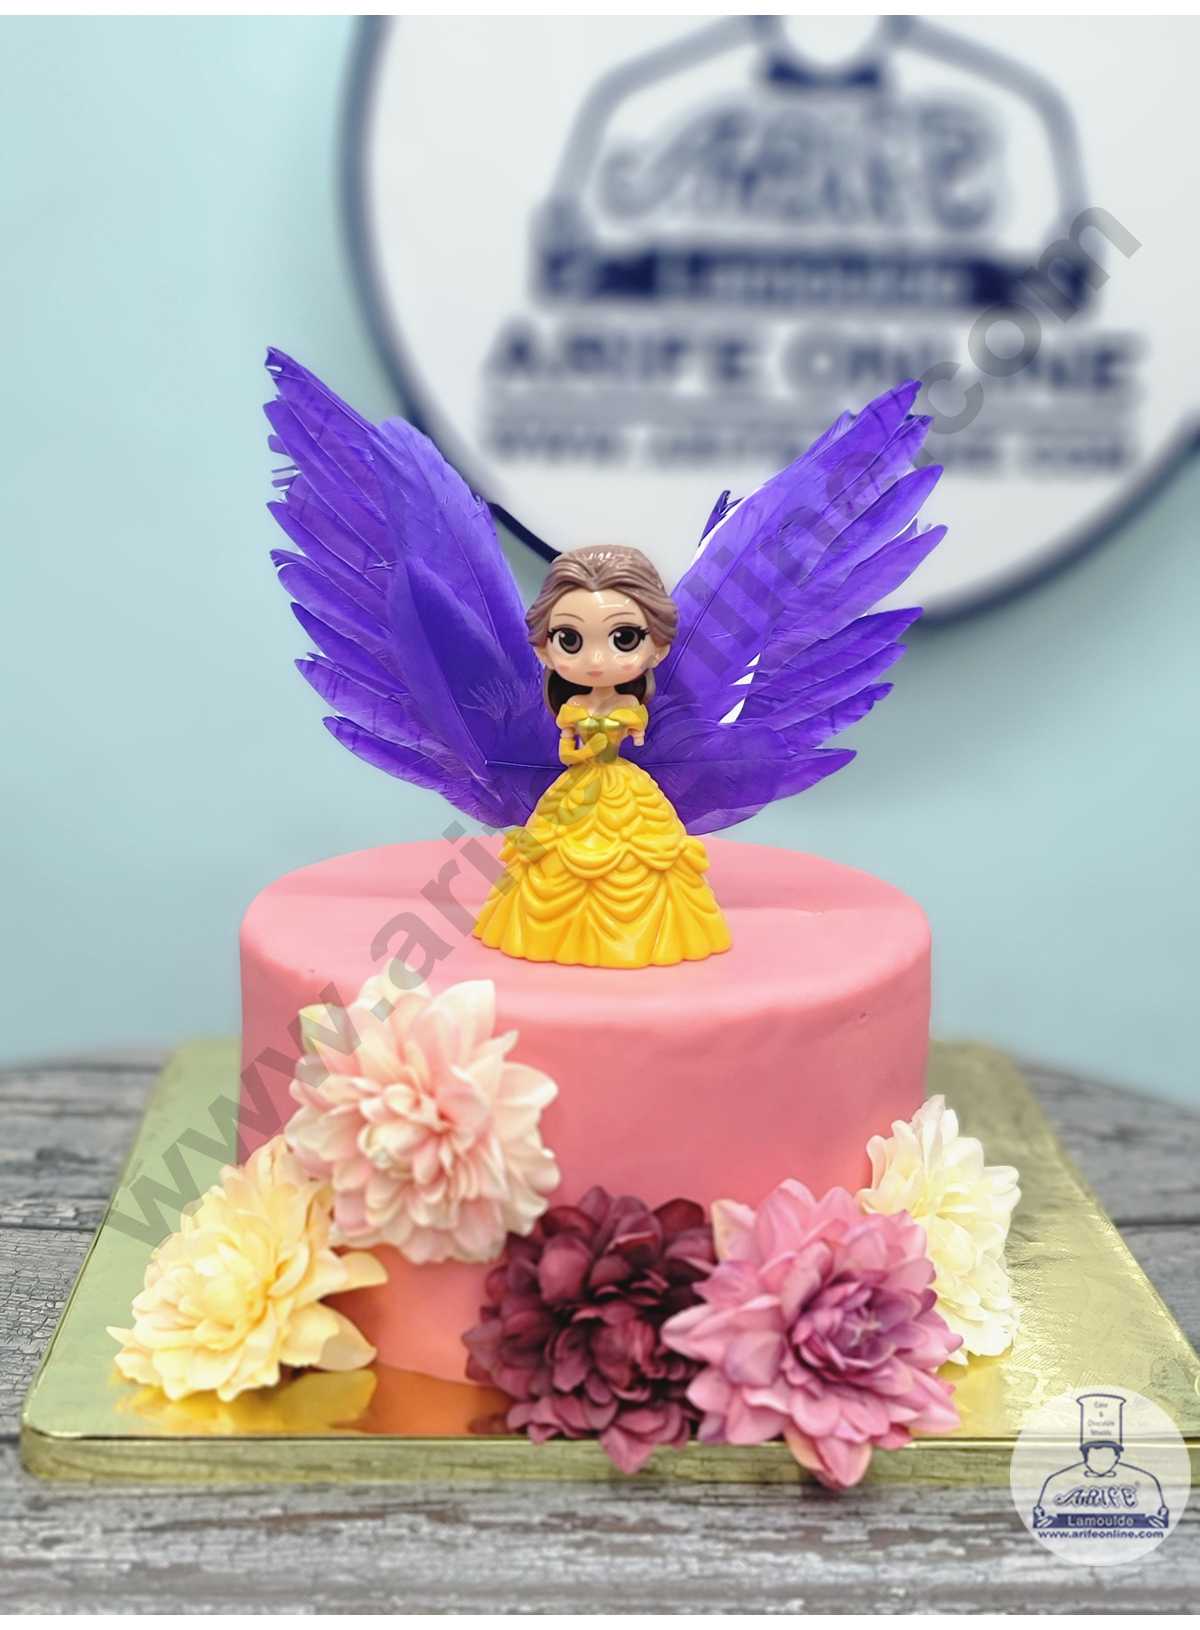 Vintage Cakes with Feathers - Cake Geek Magazine